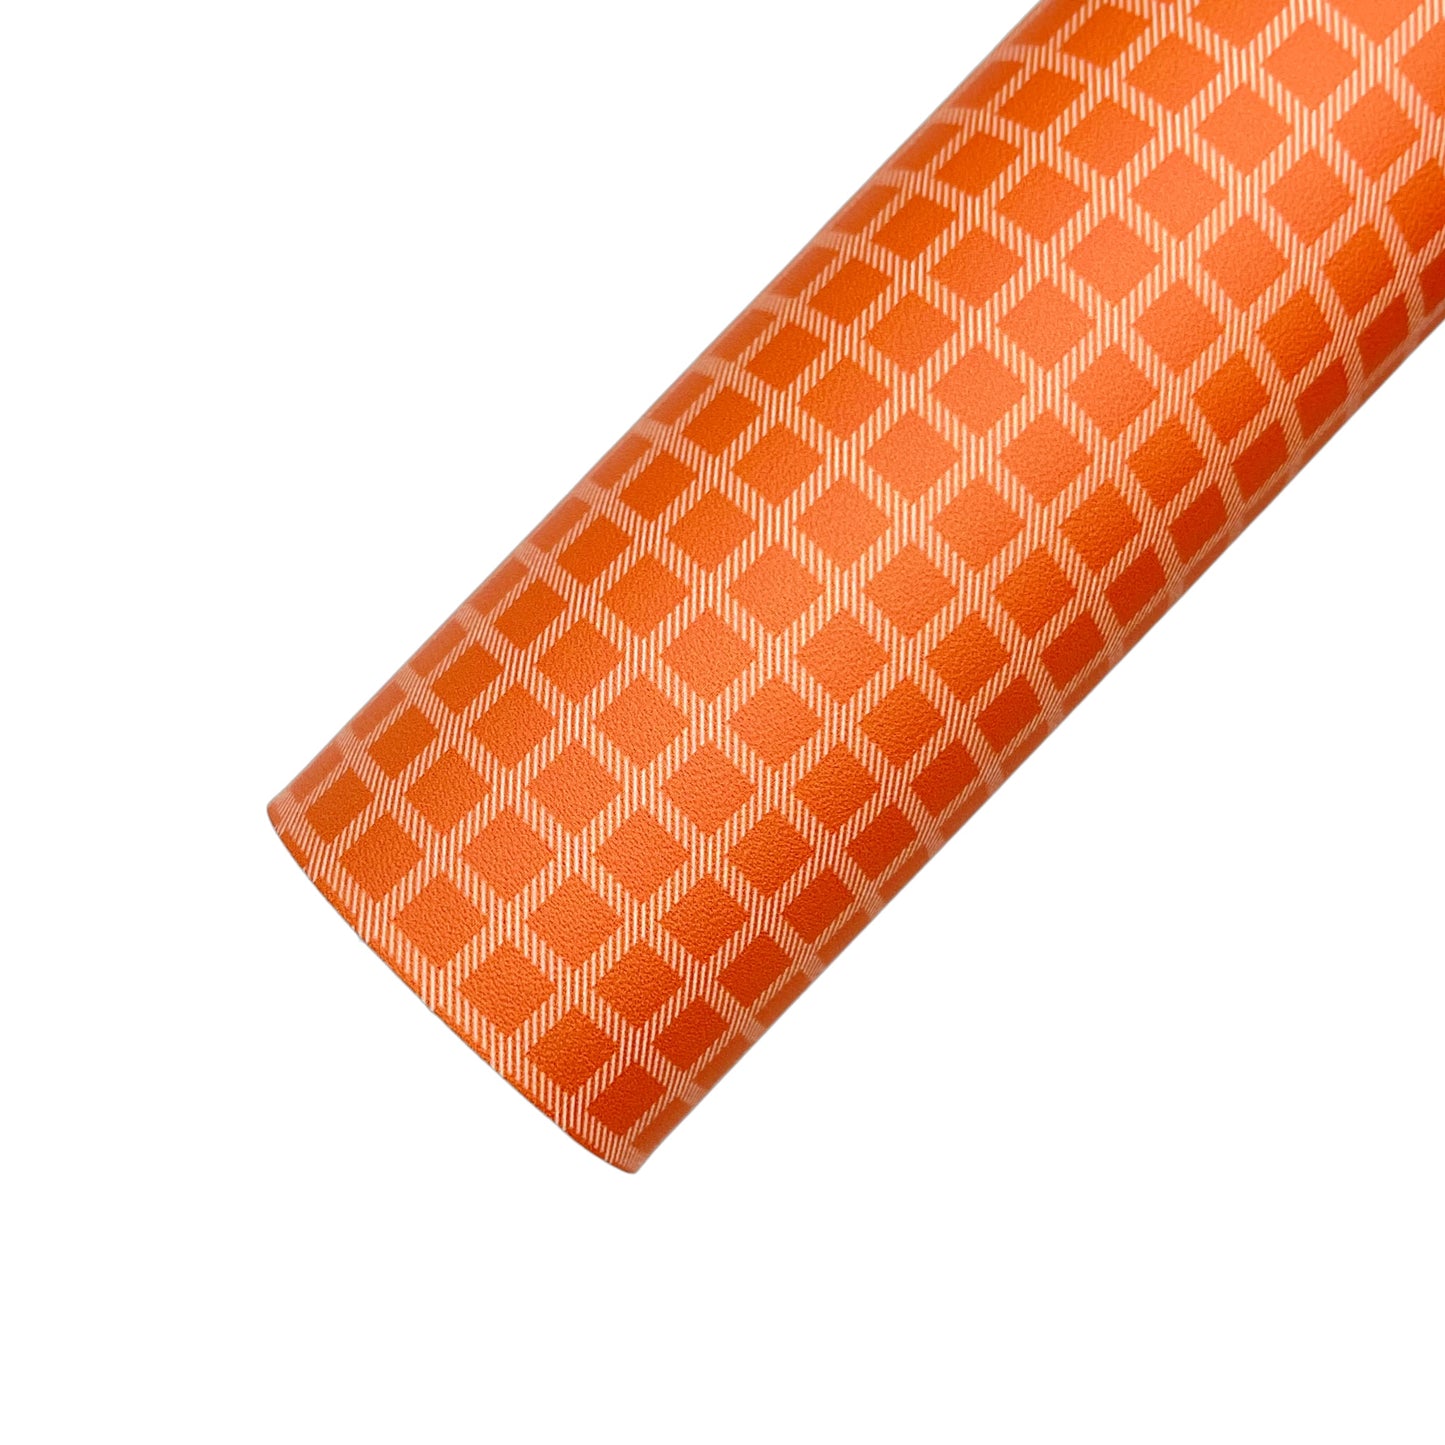 Rolled faux leather sheet with orange and white checkered plaid.